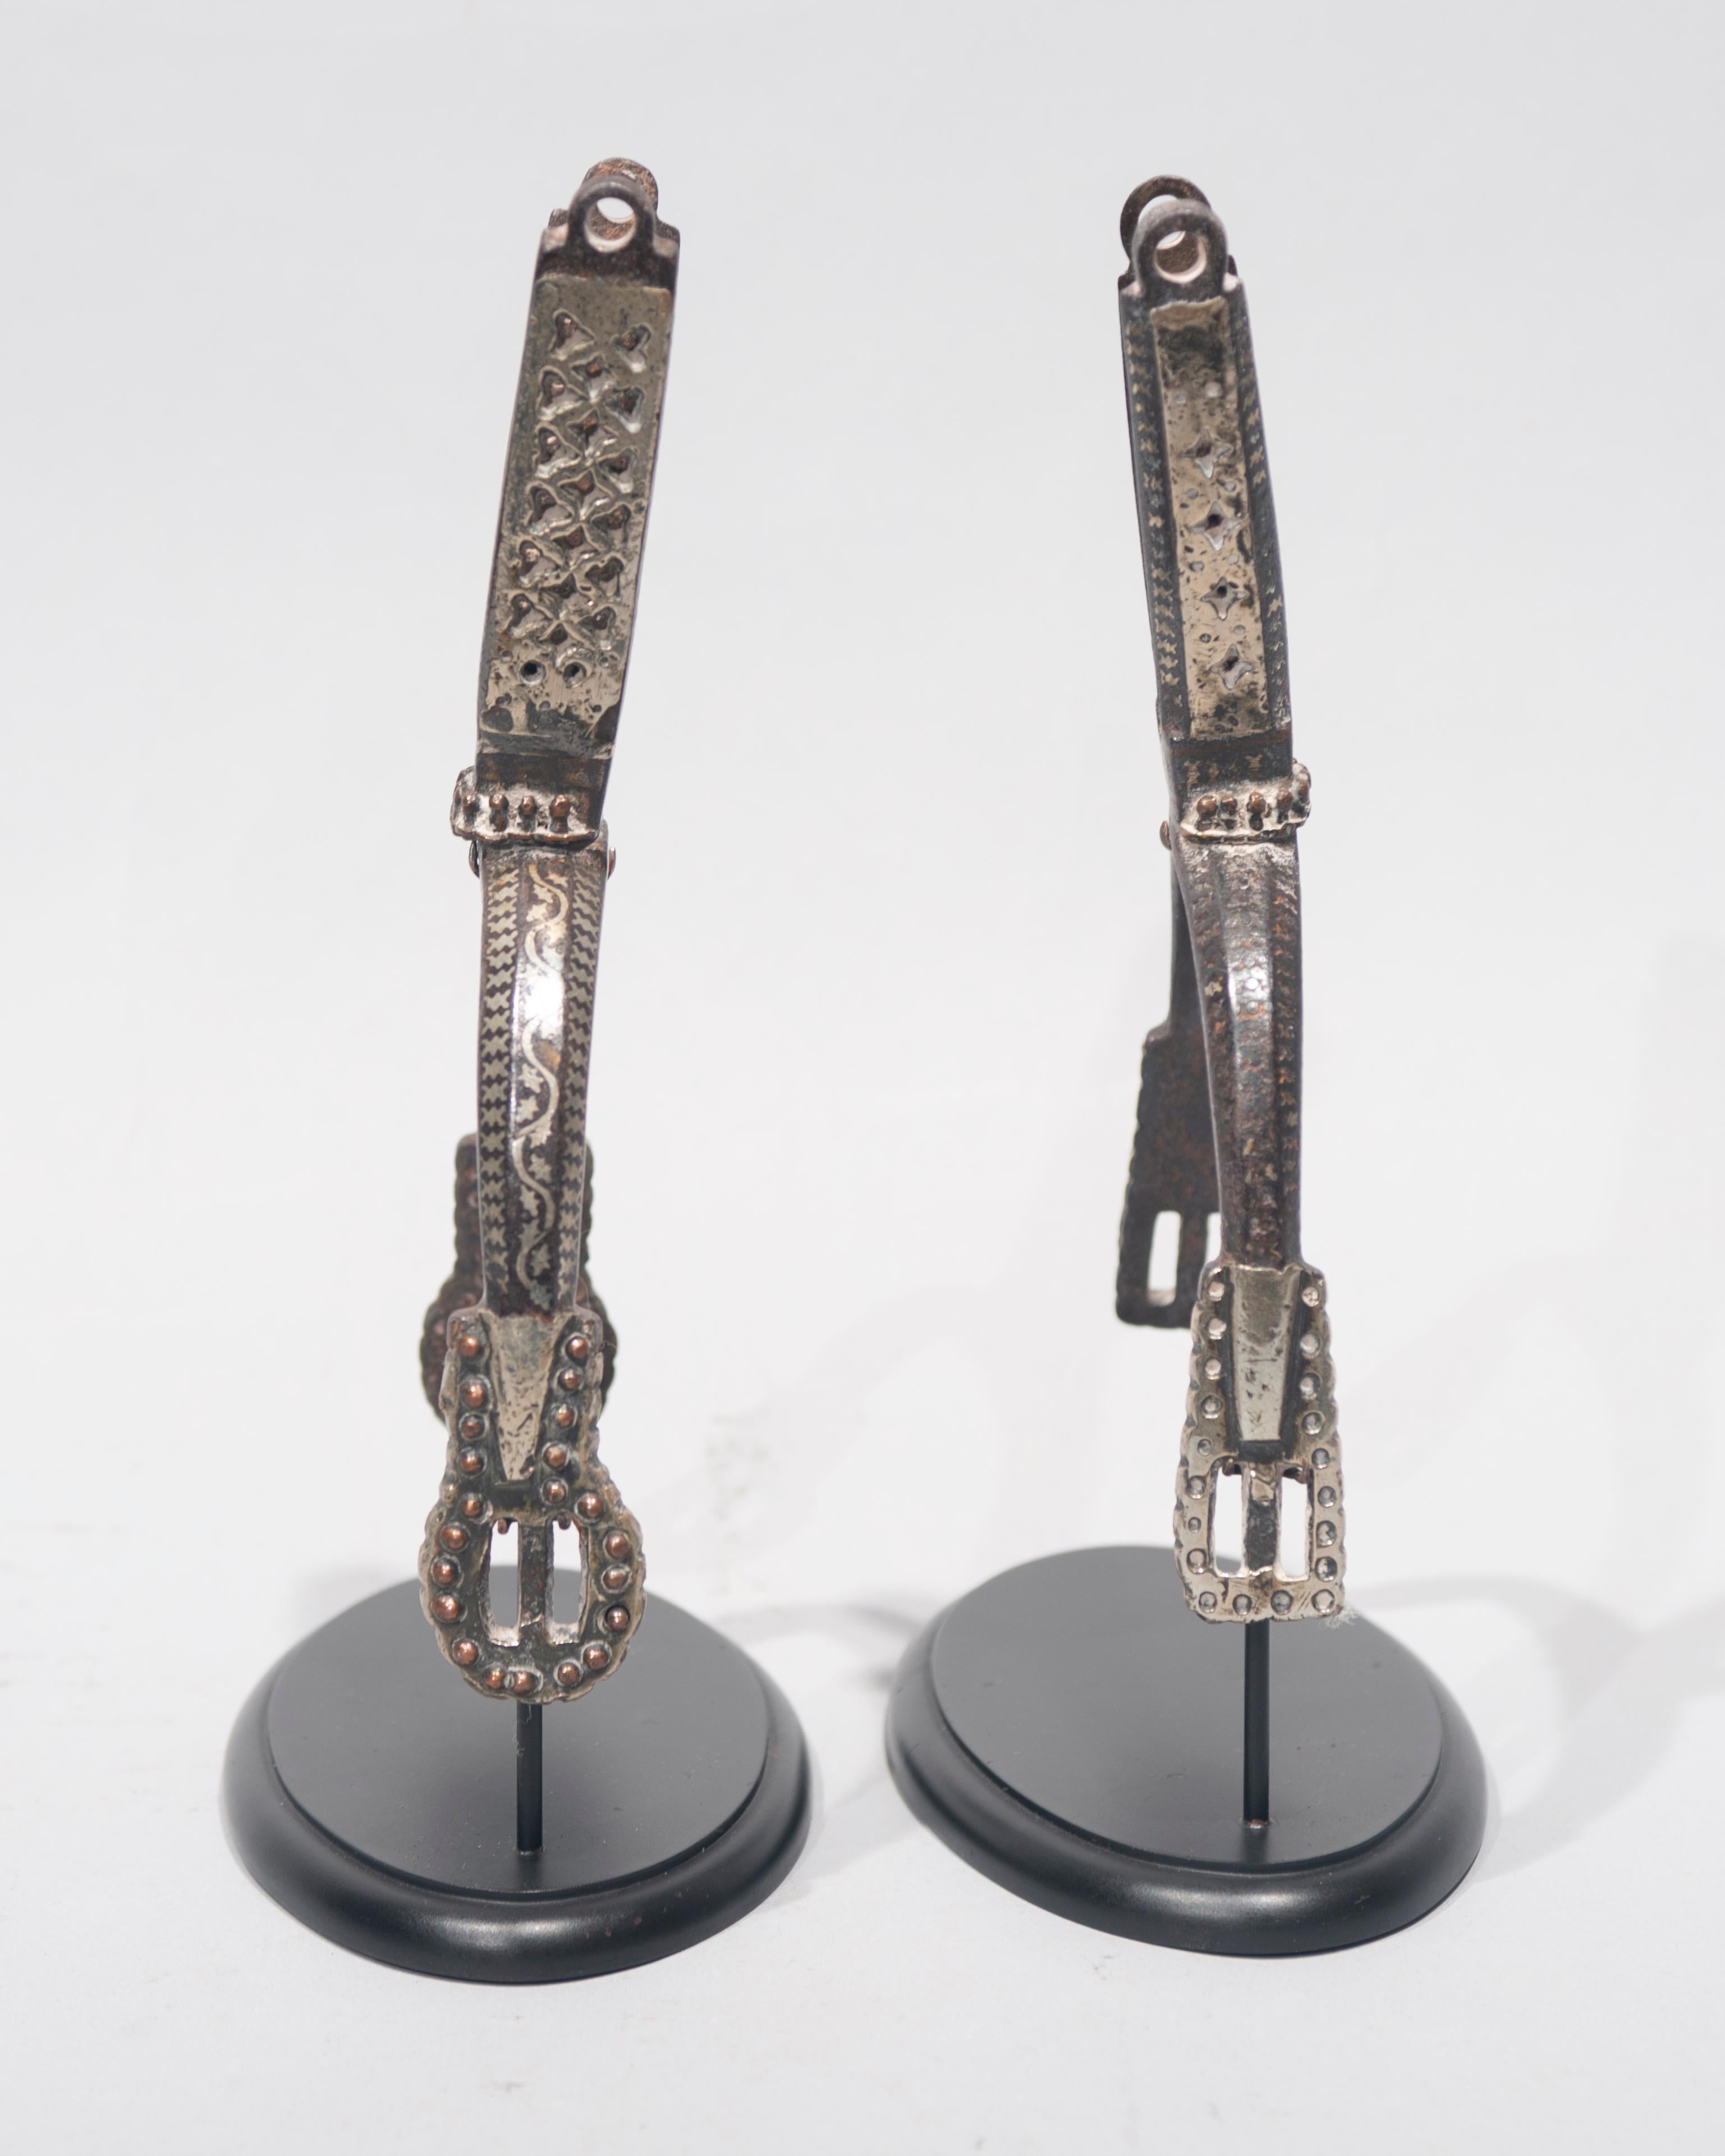 These Mexican silver spurs come to us from a private collection in Houston, Texas.